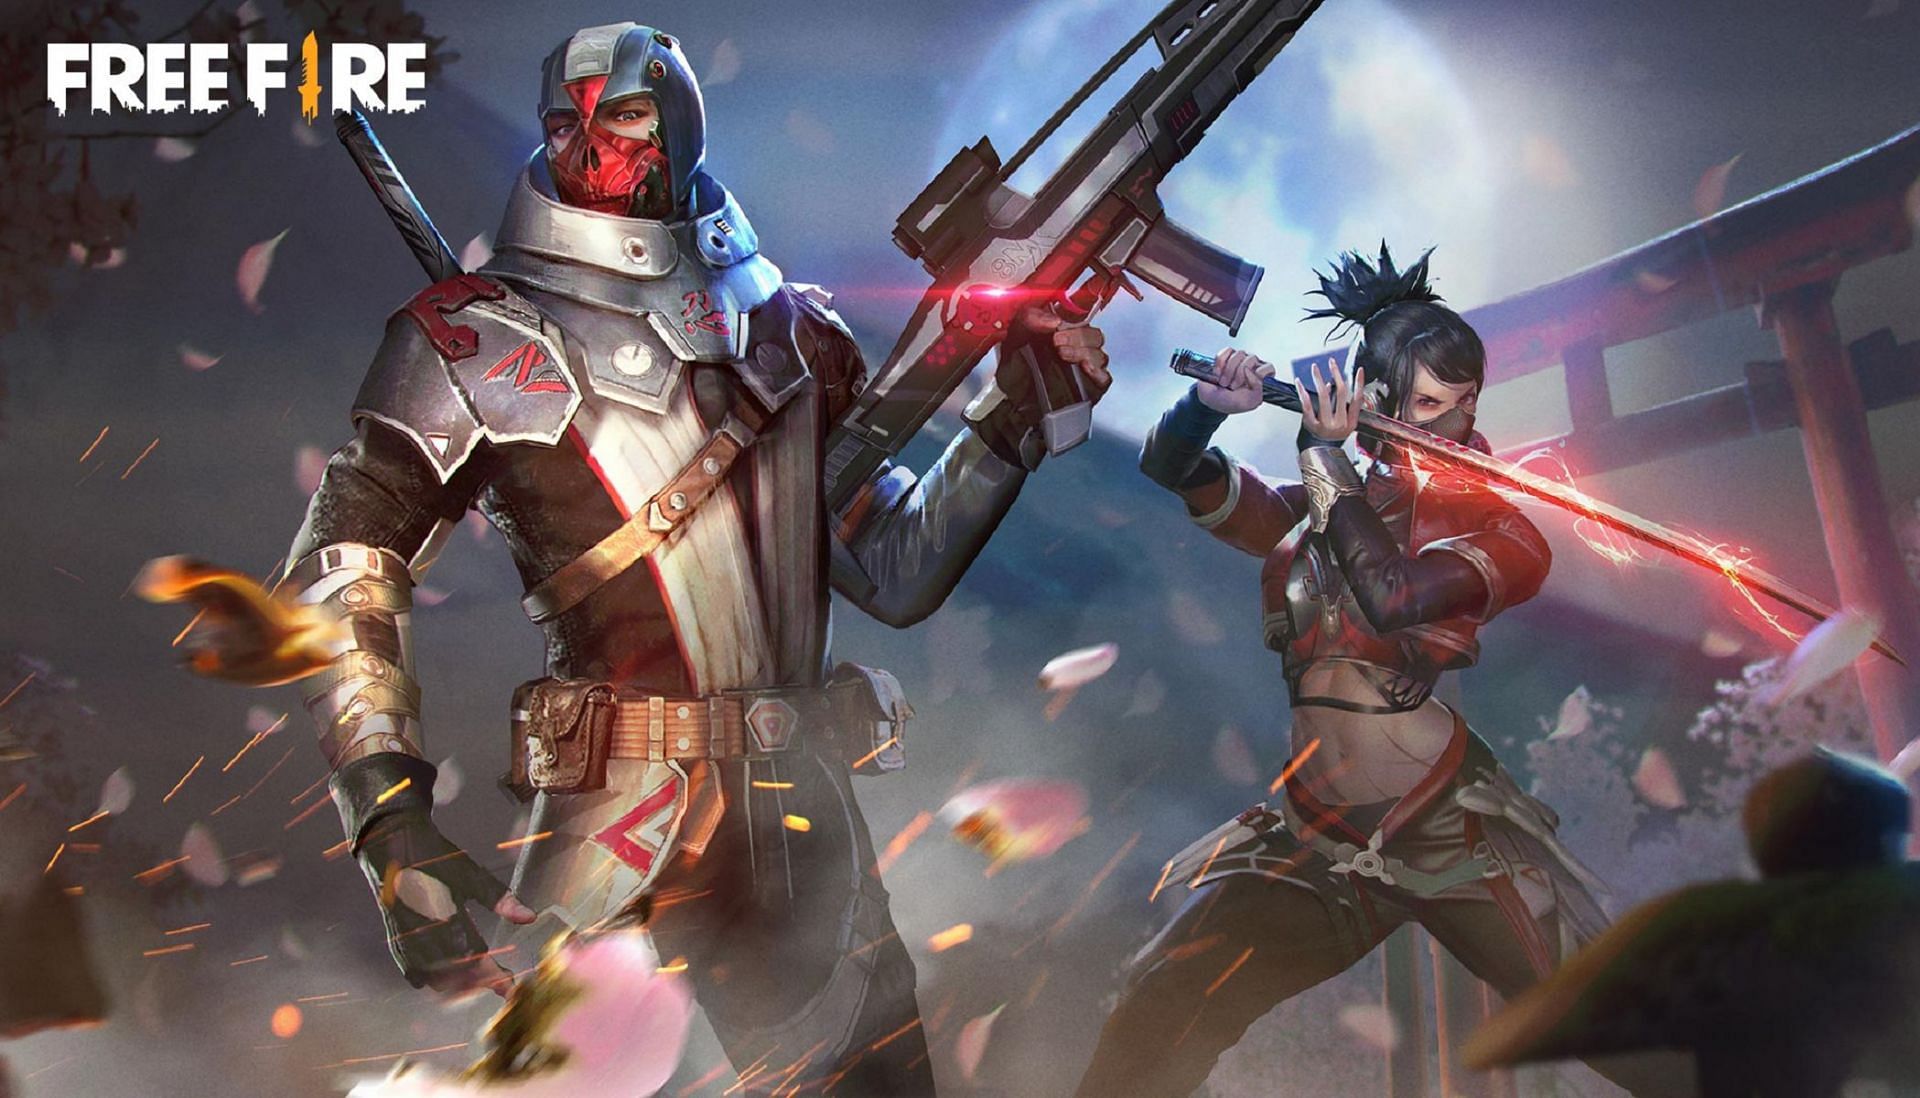 Follow these tips to get more kills in Free Fire (Image via Garena Free Fire)